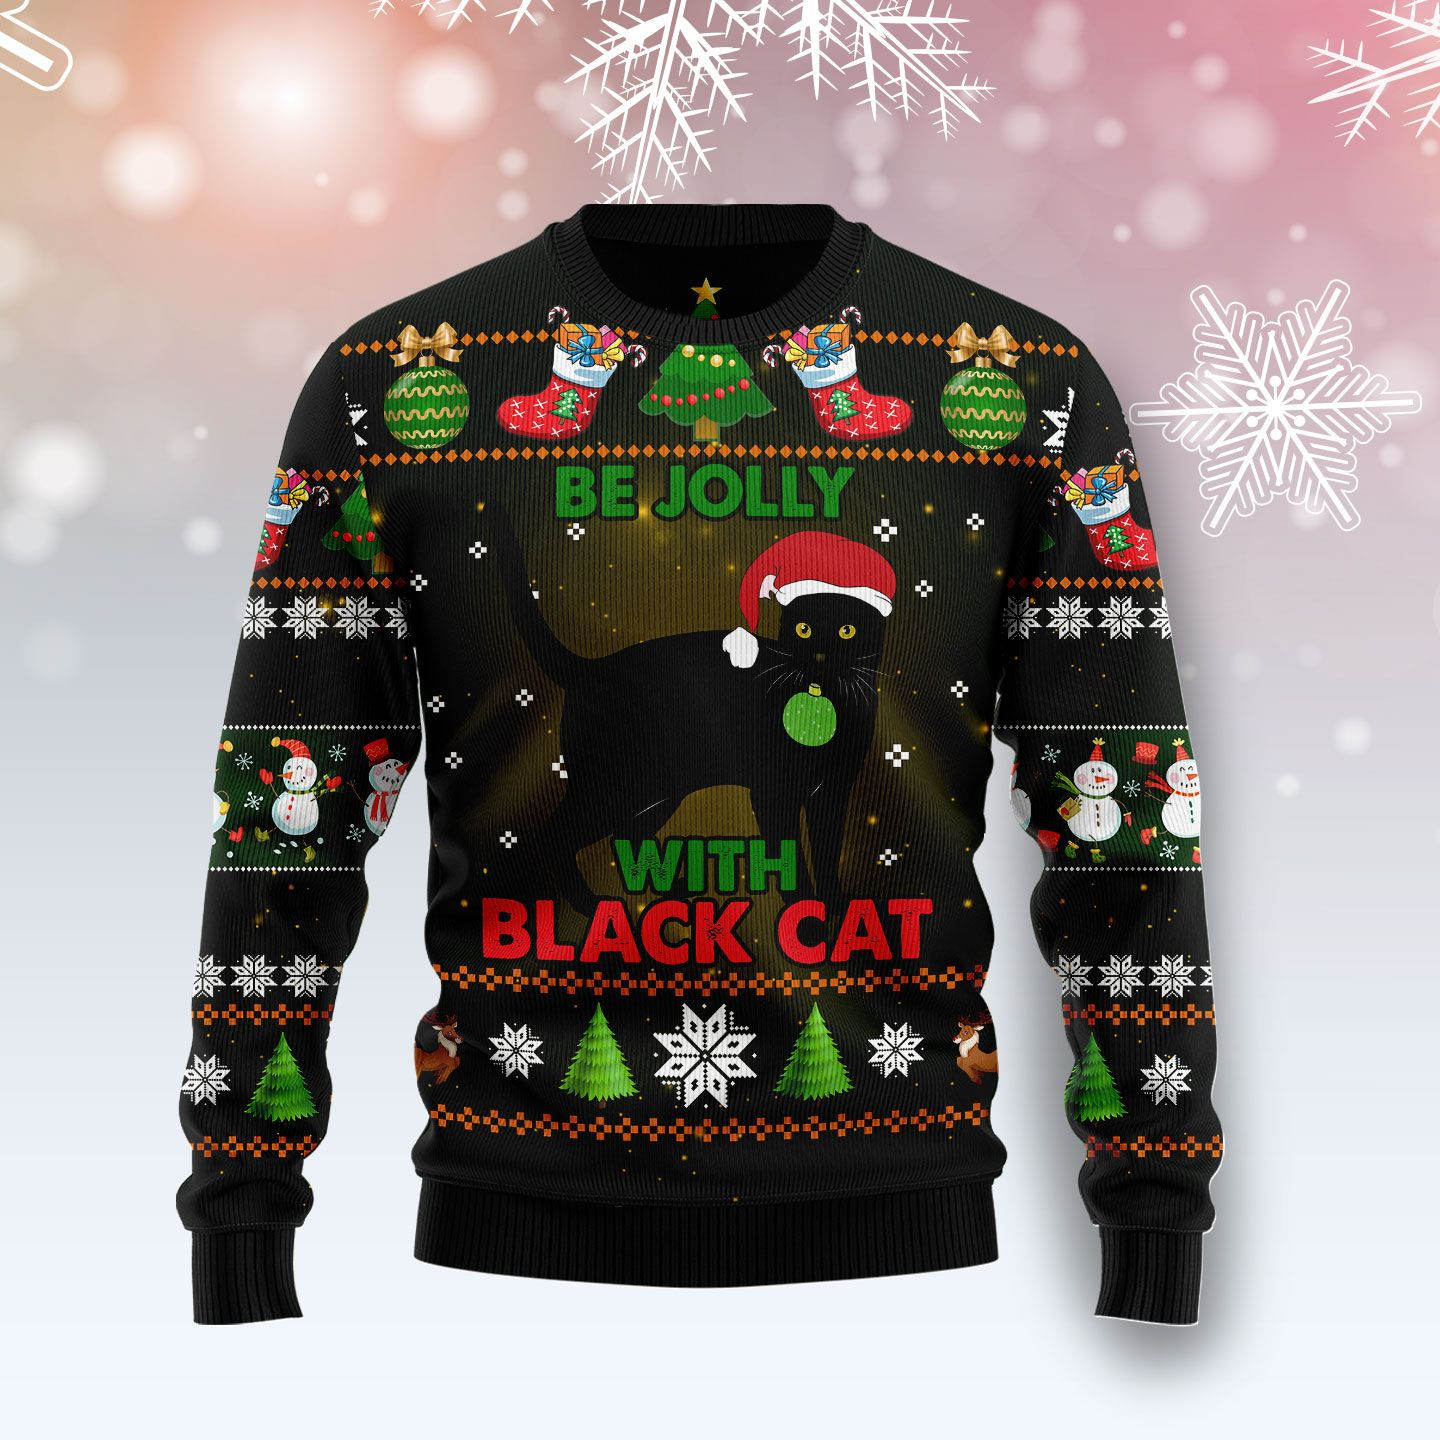 Black Cat Be Jolly Ugly Christmas Sweater Ugly Sweater For Men Women, Holiday Sweater